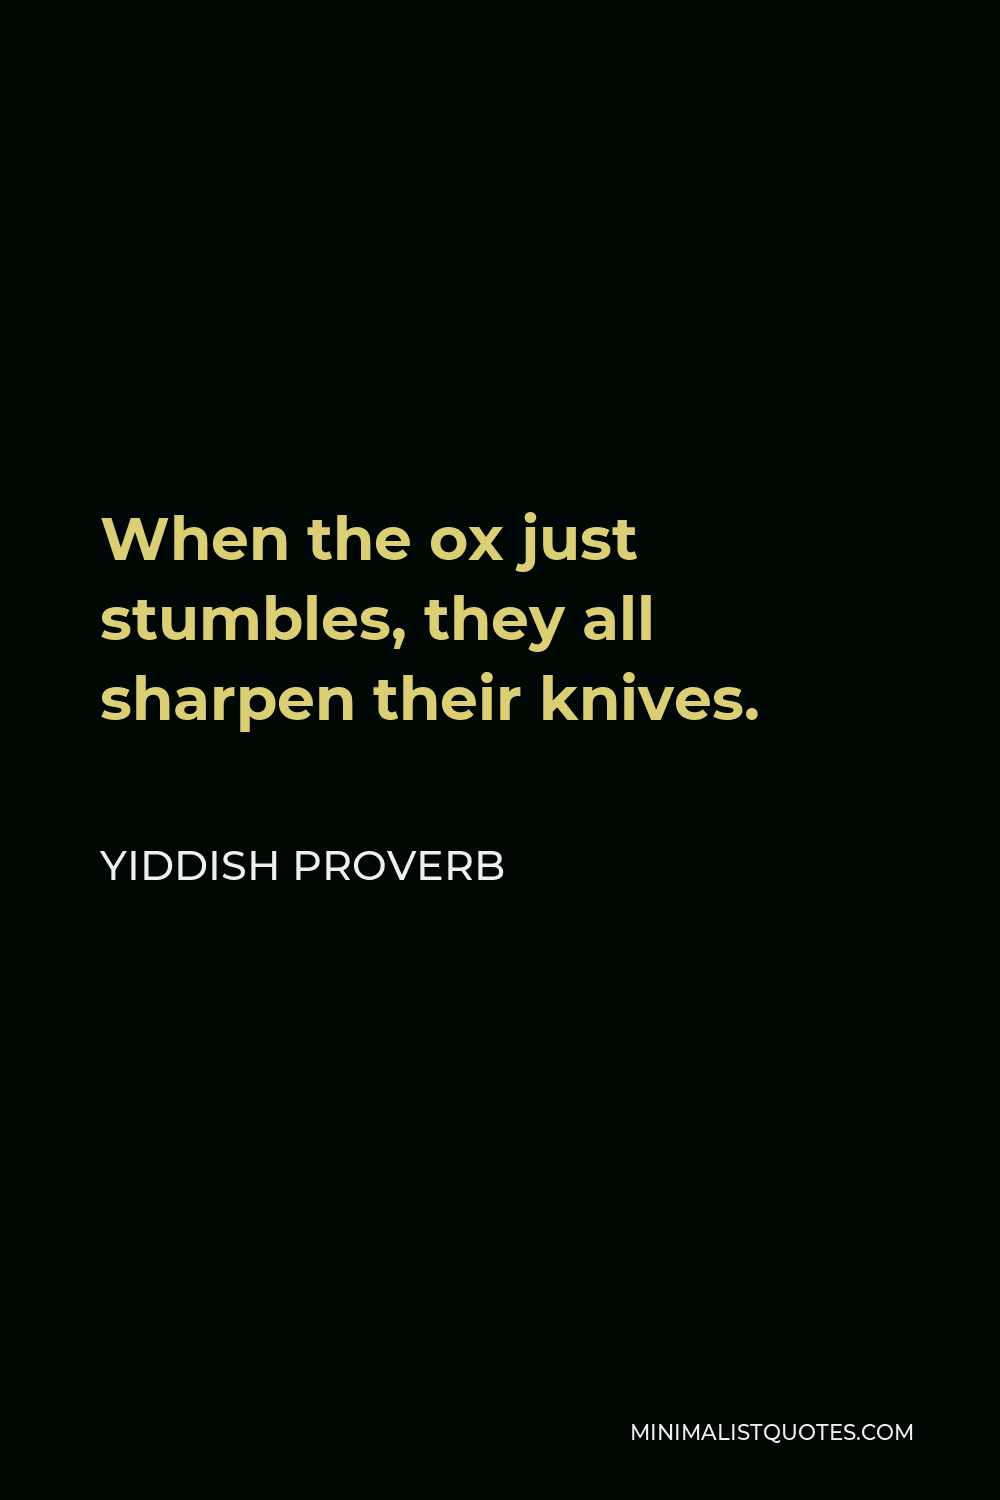 Yiddish Proverb Quote - When the ox just stumbles, they all sharpen their knives.